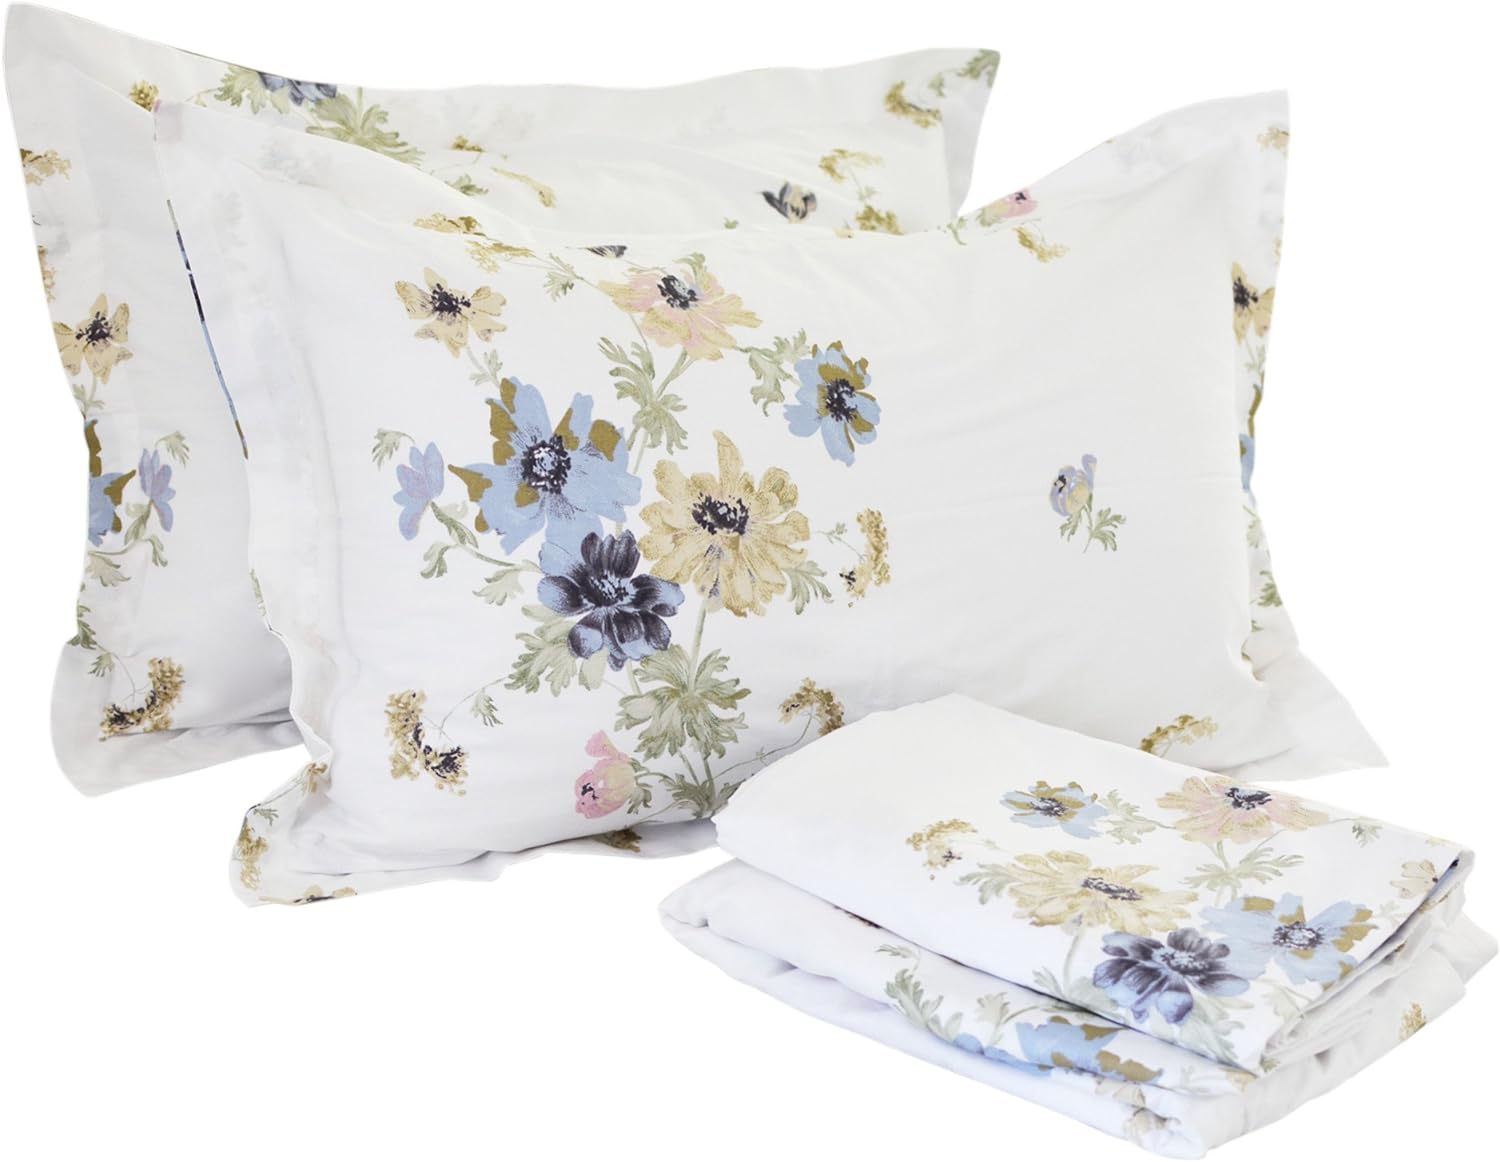 FADFAY Floral Bed Sheet Set 100% Cotton 4 Piece Shabby Style Bedding Set (Queen, White Floral)